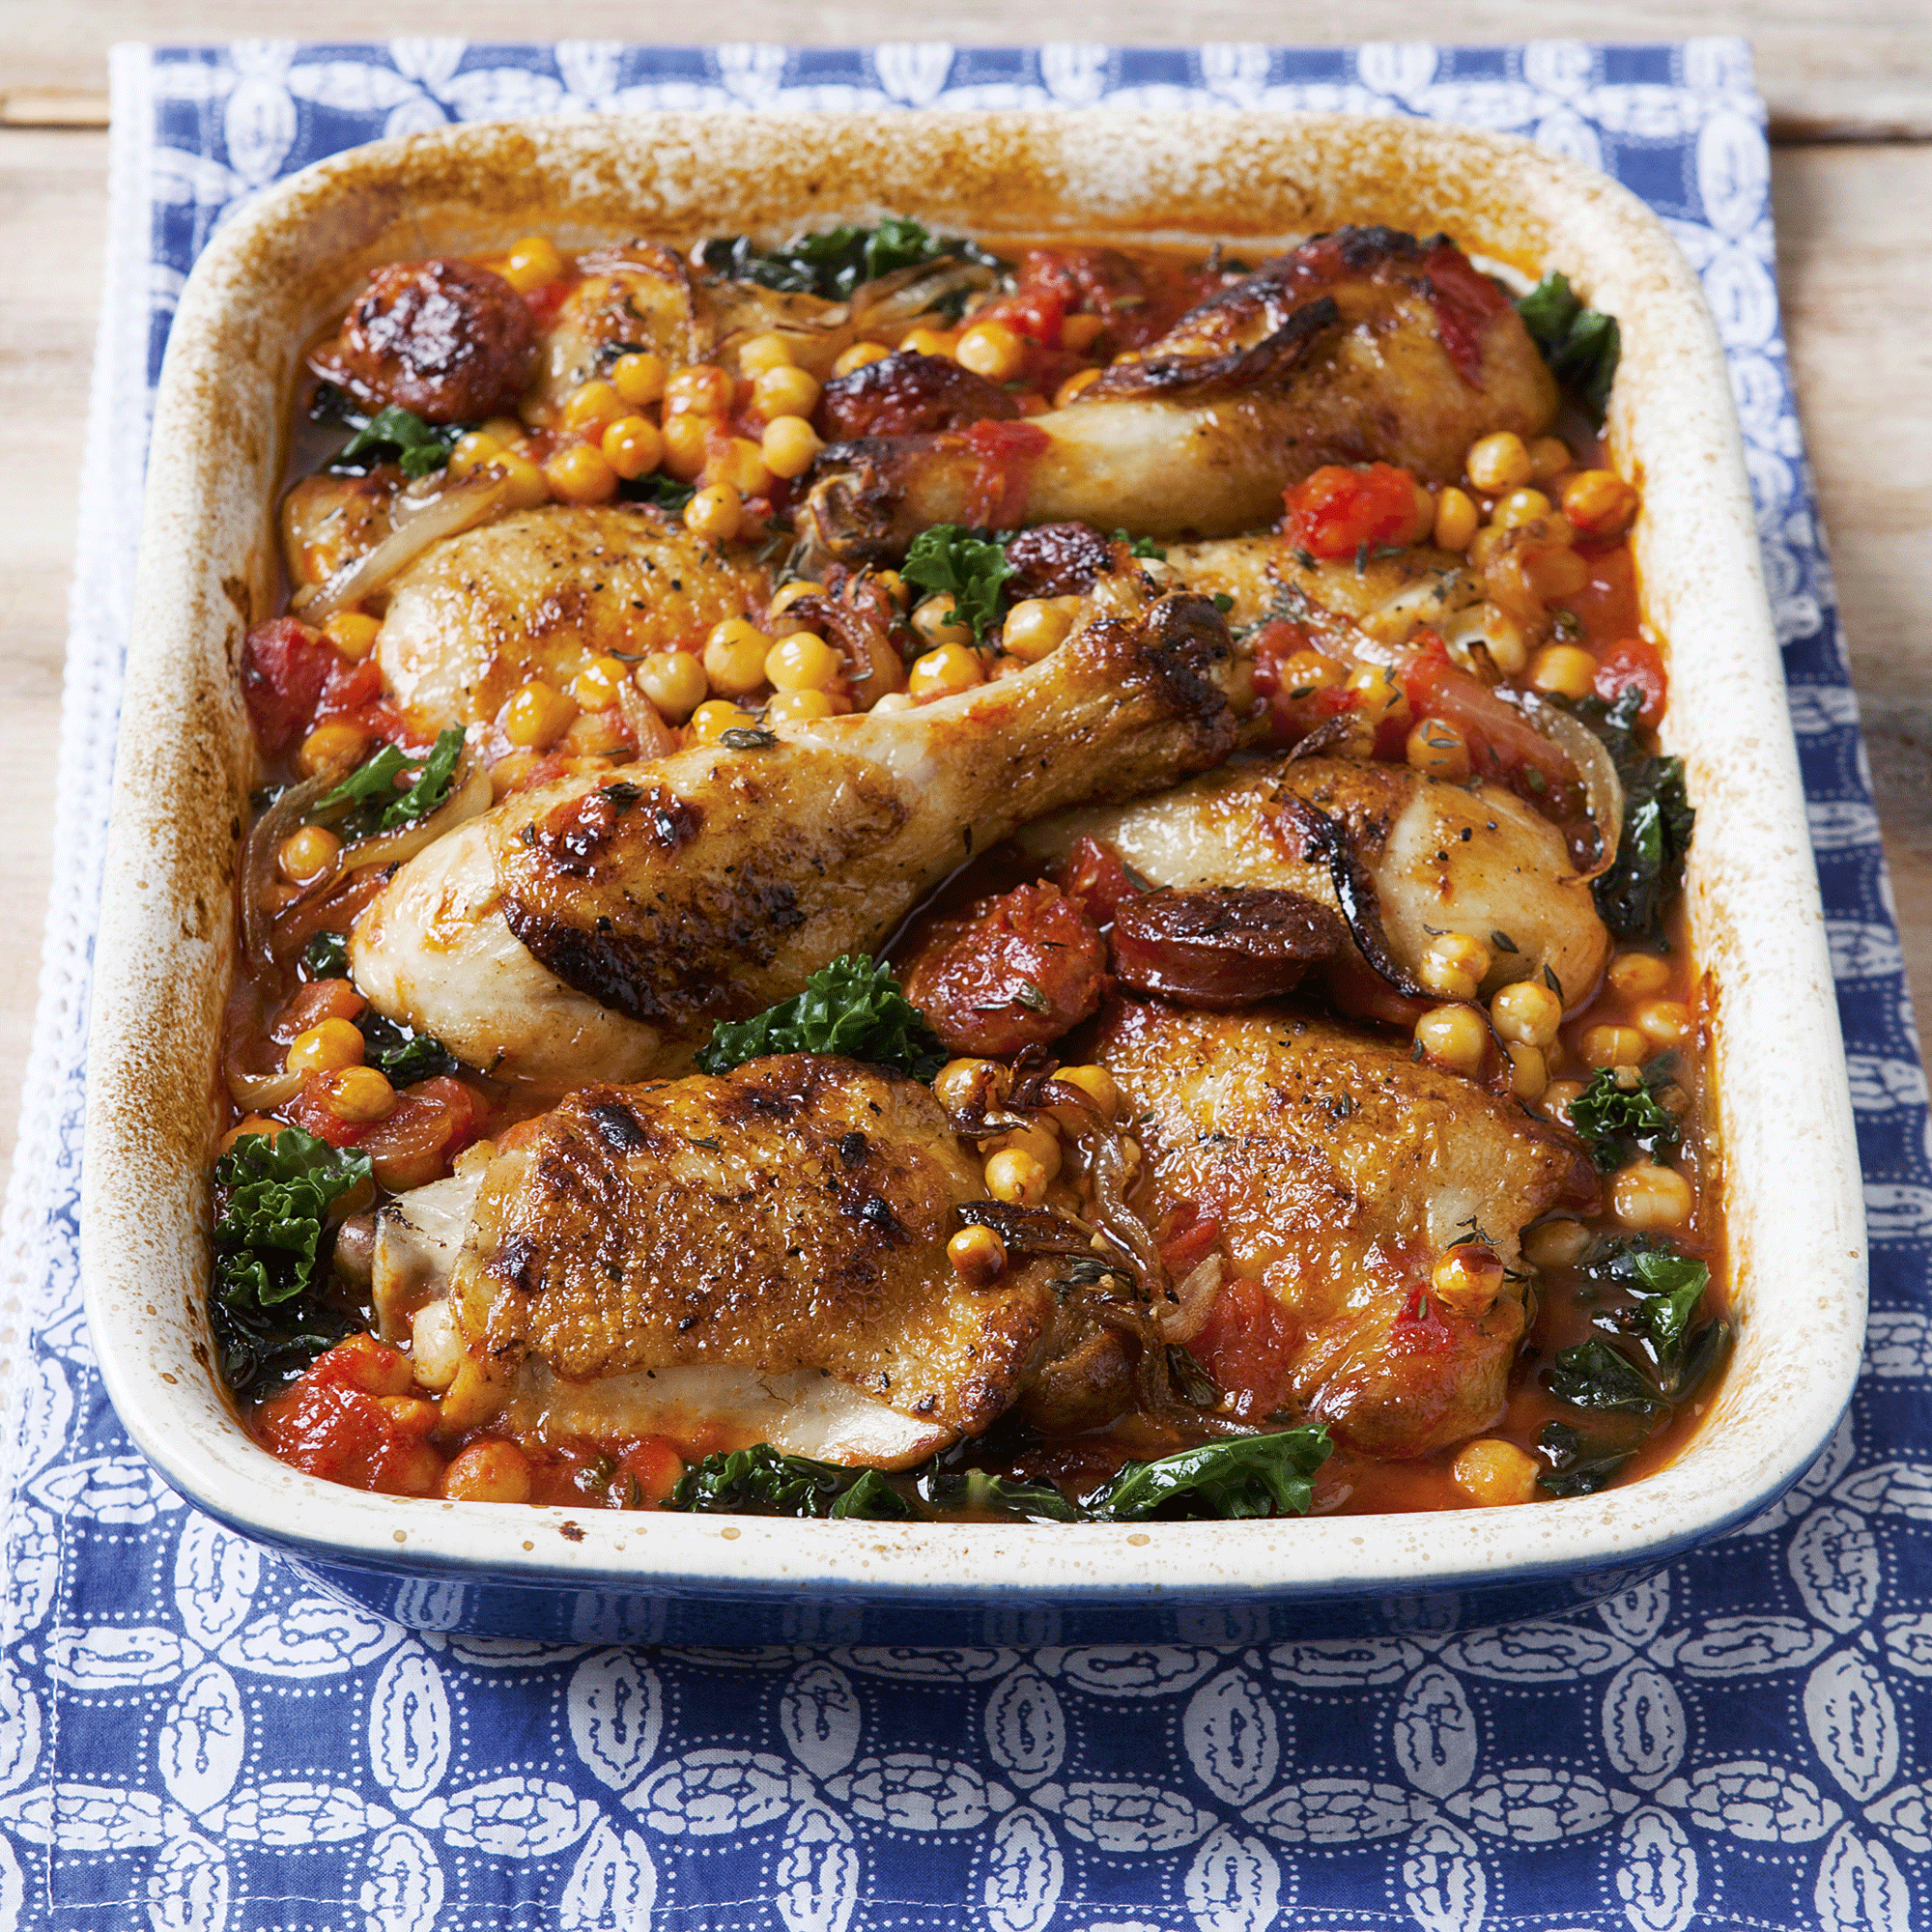 Davina McCall's One Pot Chicken With Chorizo, Chickpeas And Kale